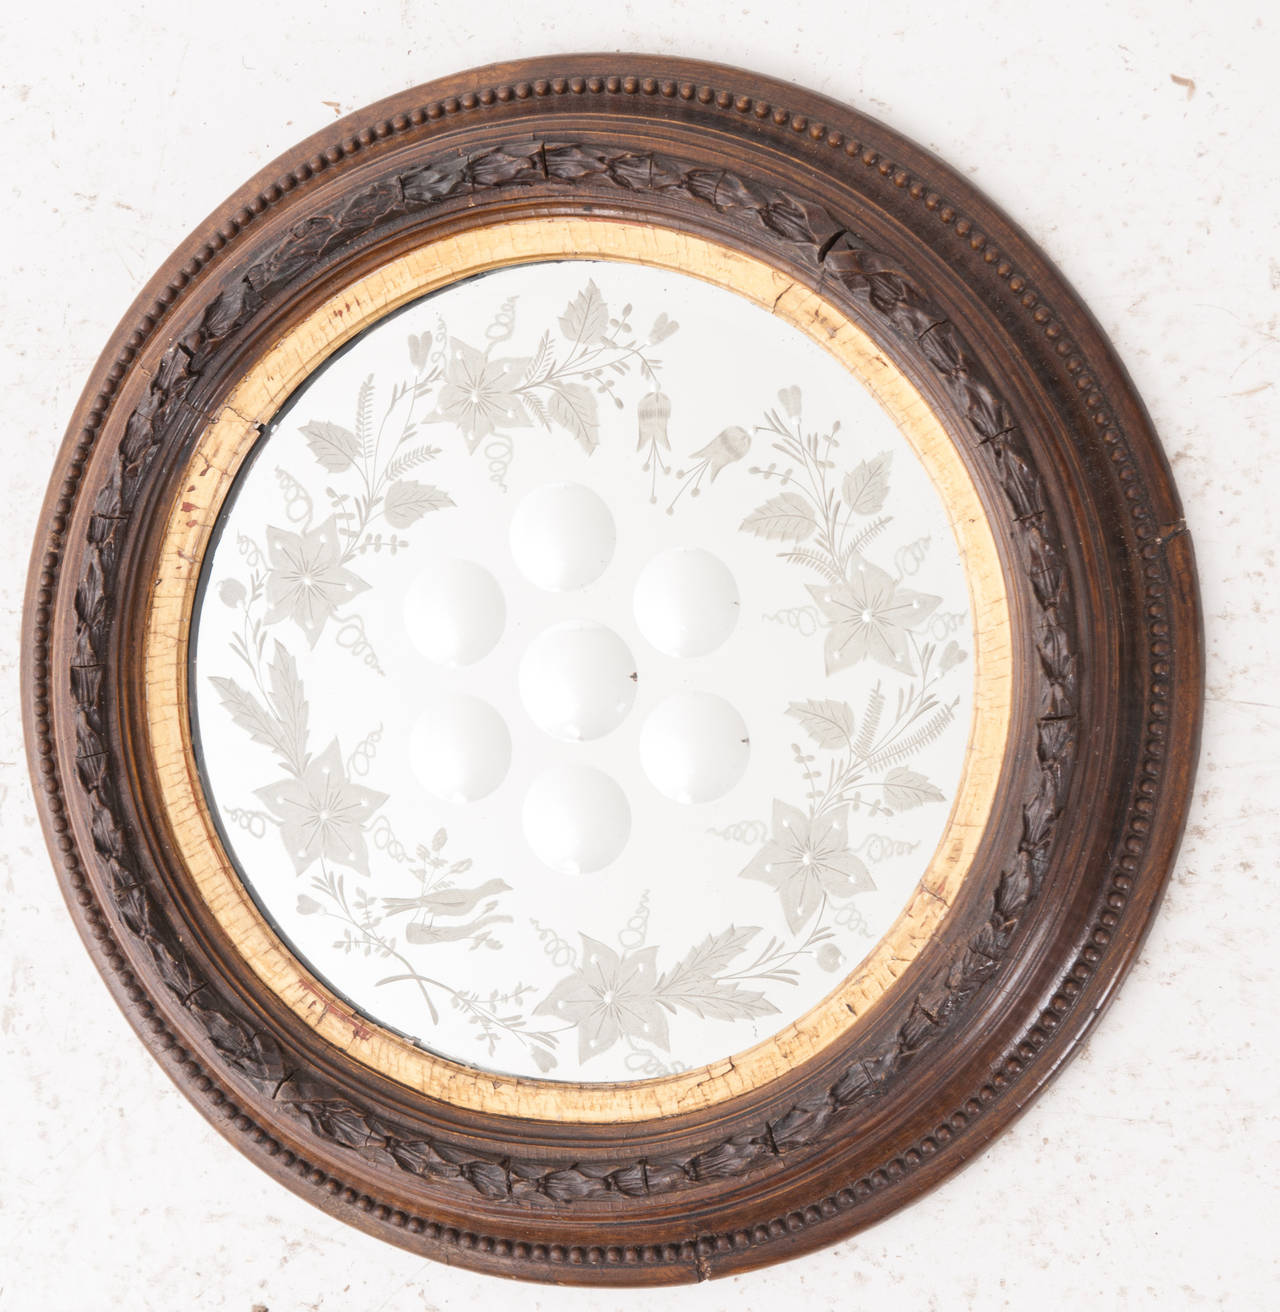 A fabulous circular bull's eye mirror with seven convex mirrors surrounded by detailed etching of flowers and greenery! Gold gilt banding surrounds the original mirror with a hand carved wood frame. 1860's